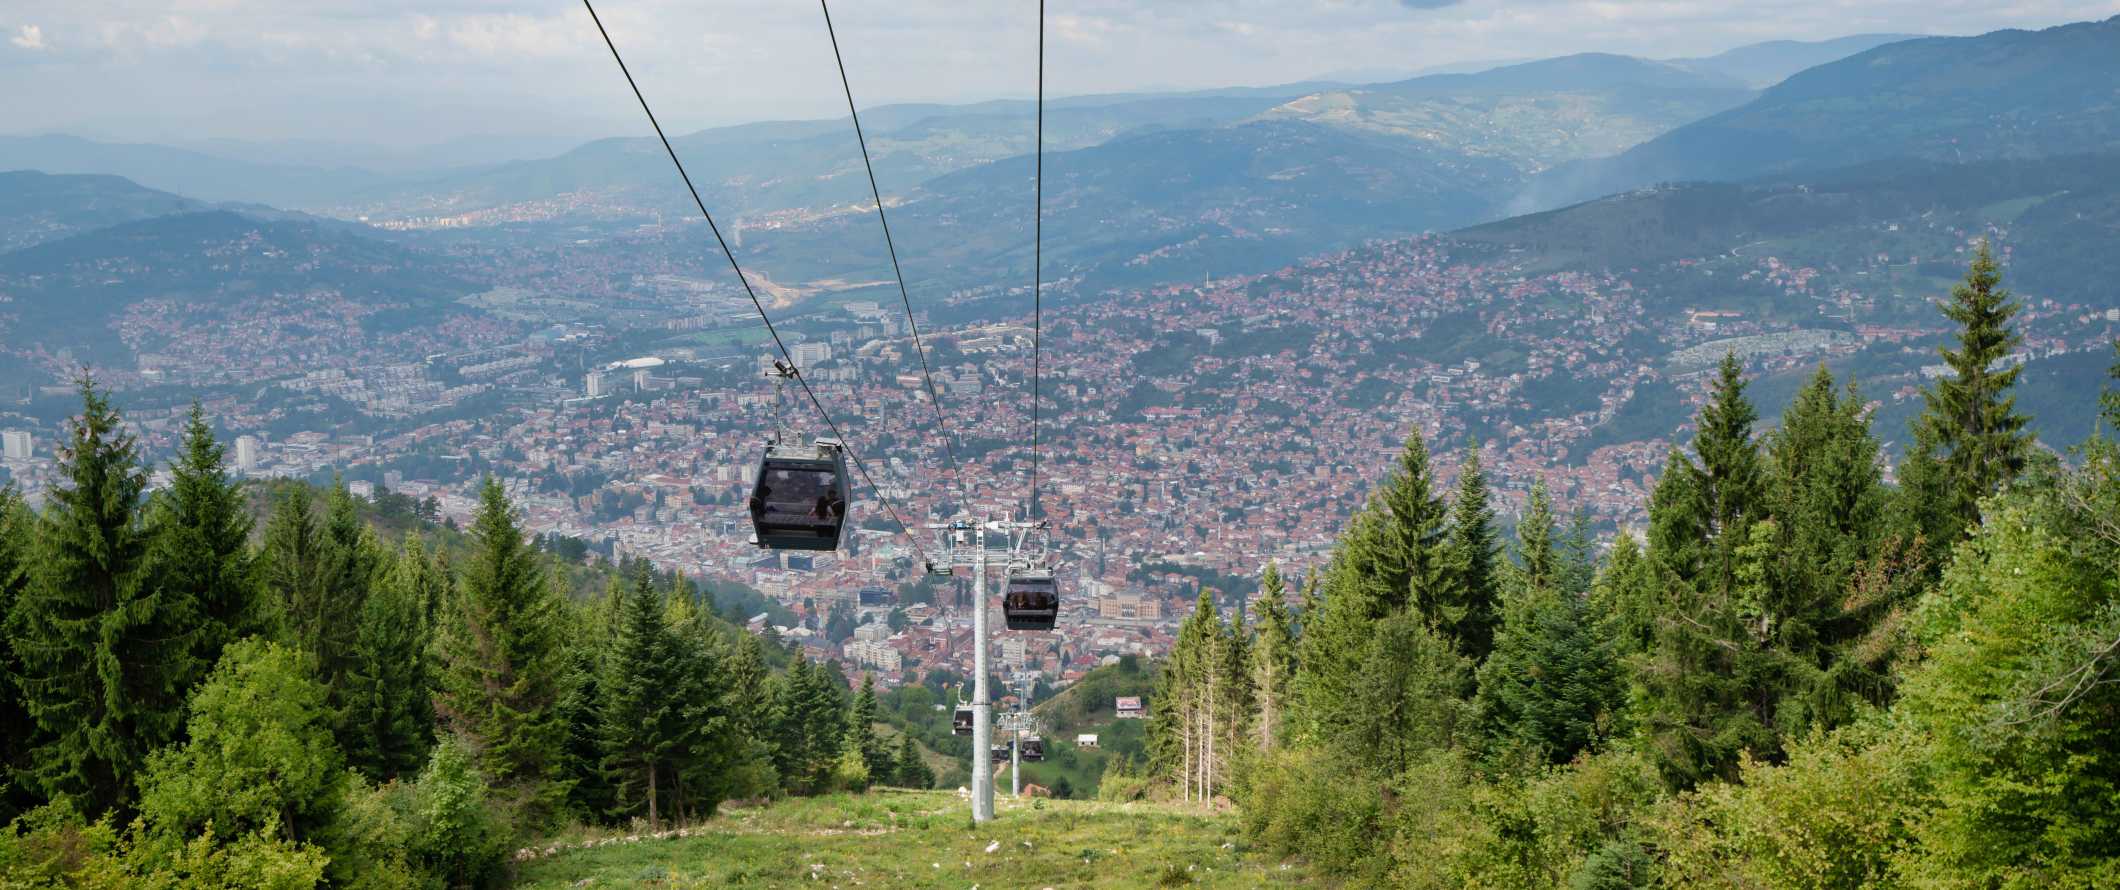 Cable cars descending from a mountain into the city of Sarajevo, in Bosnia & Herzegovina